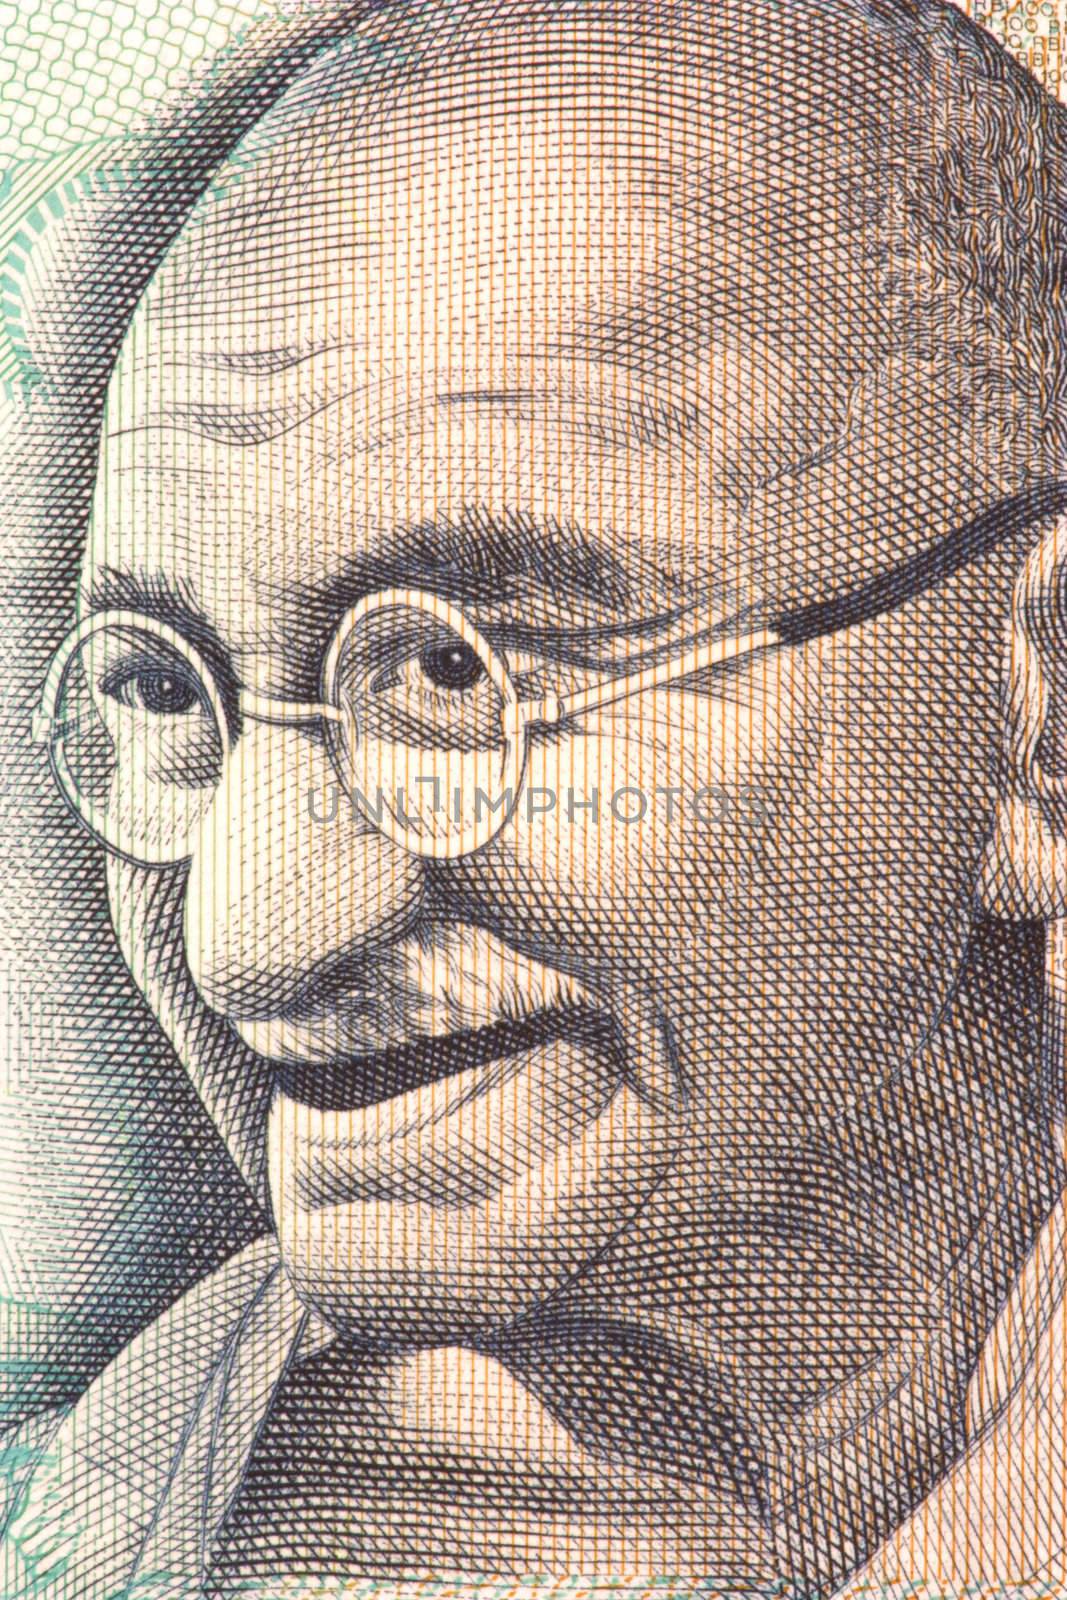 Mahatma Gandhi on Currency Note by shariffc